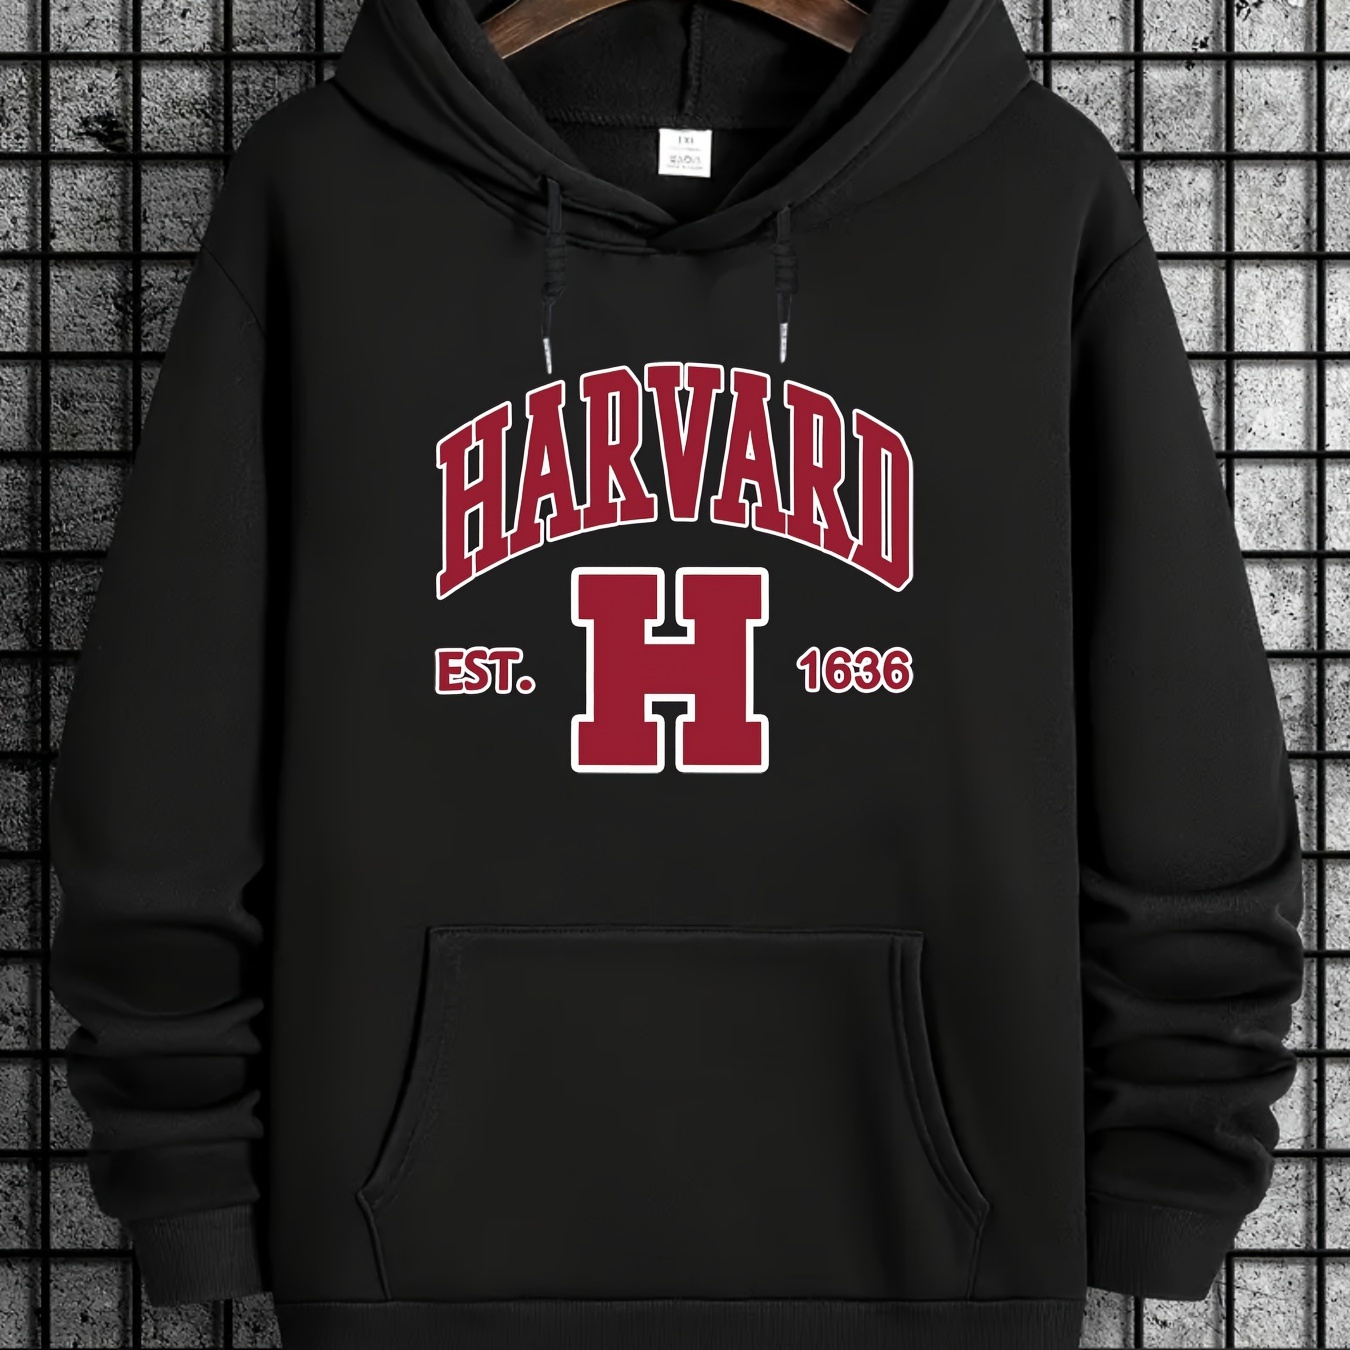 

Harvard Print Men's Sweatshirt Casual Creative Design With Stretch Fabric For Comfortable Spring Autumn Wear